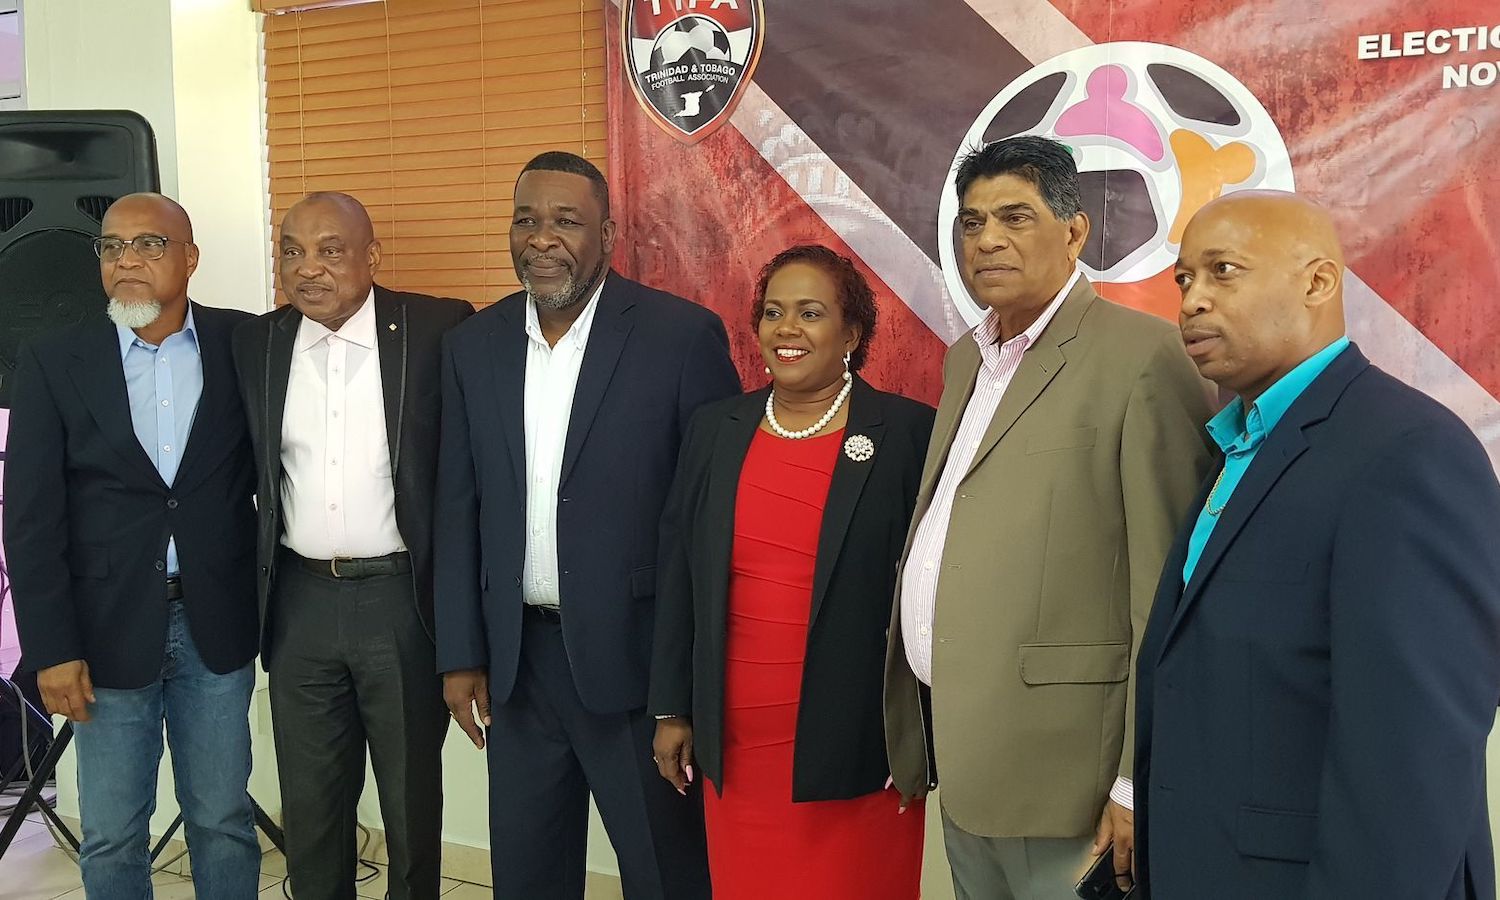 United TTFA president William Wallace, third from left, is flanked by Keith Look Loy, left- TTSL Board member, Joseph Sam Phillip- vice president, Clynt Taylor- his first vice president at right, Anthony Harford- president of the NFA, second from right, Susan Joseph-Warrick, second vice president, at November 2019 Breakfast Launch for their slate.